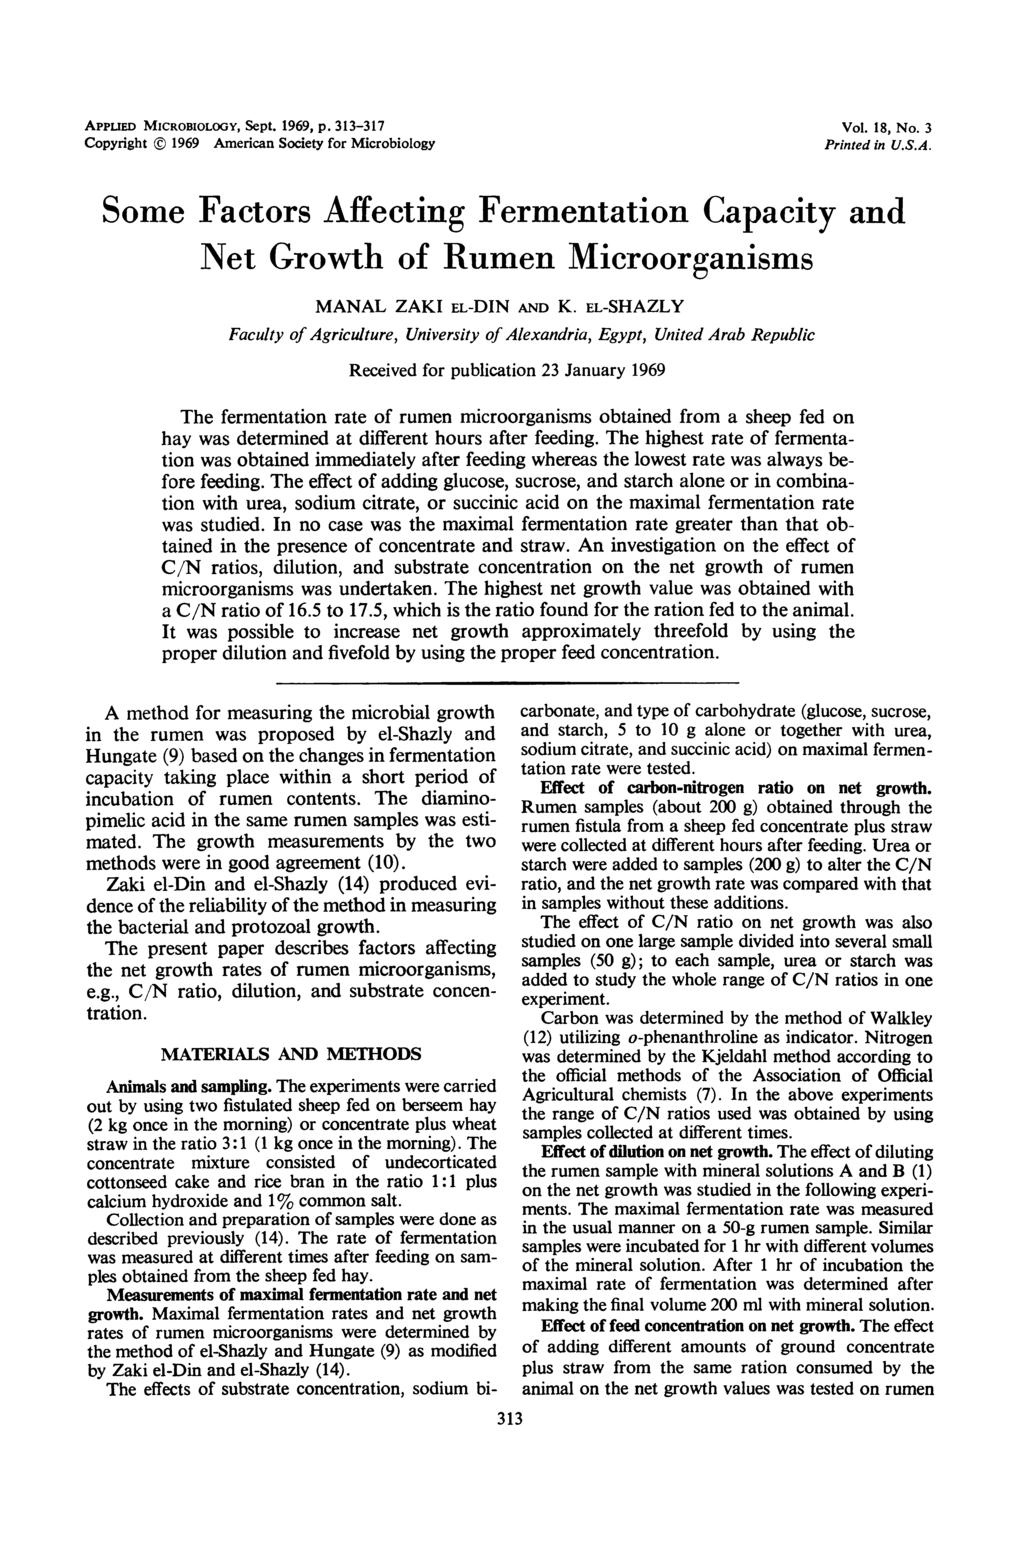 APPLIED MICROBIOLOGY, Sept. 1969, p. 313-317 Copyright 1969 American Society for Microbiology Vol. 18, No. 3 Printed in U.S.A. Some Factors Affecting Fermentation Capacity and Net Growth of Rumen Microorganisms MANAL ZAKI EL-DIN AND K.